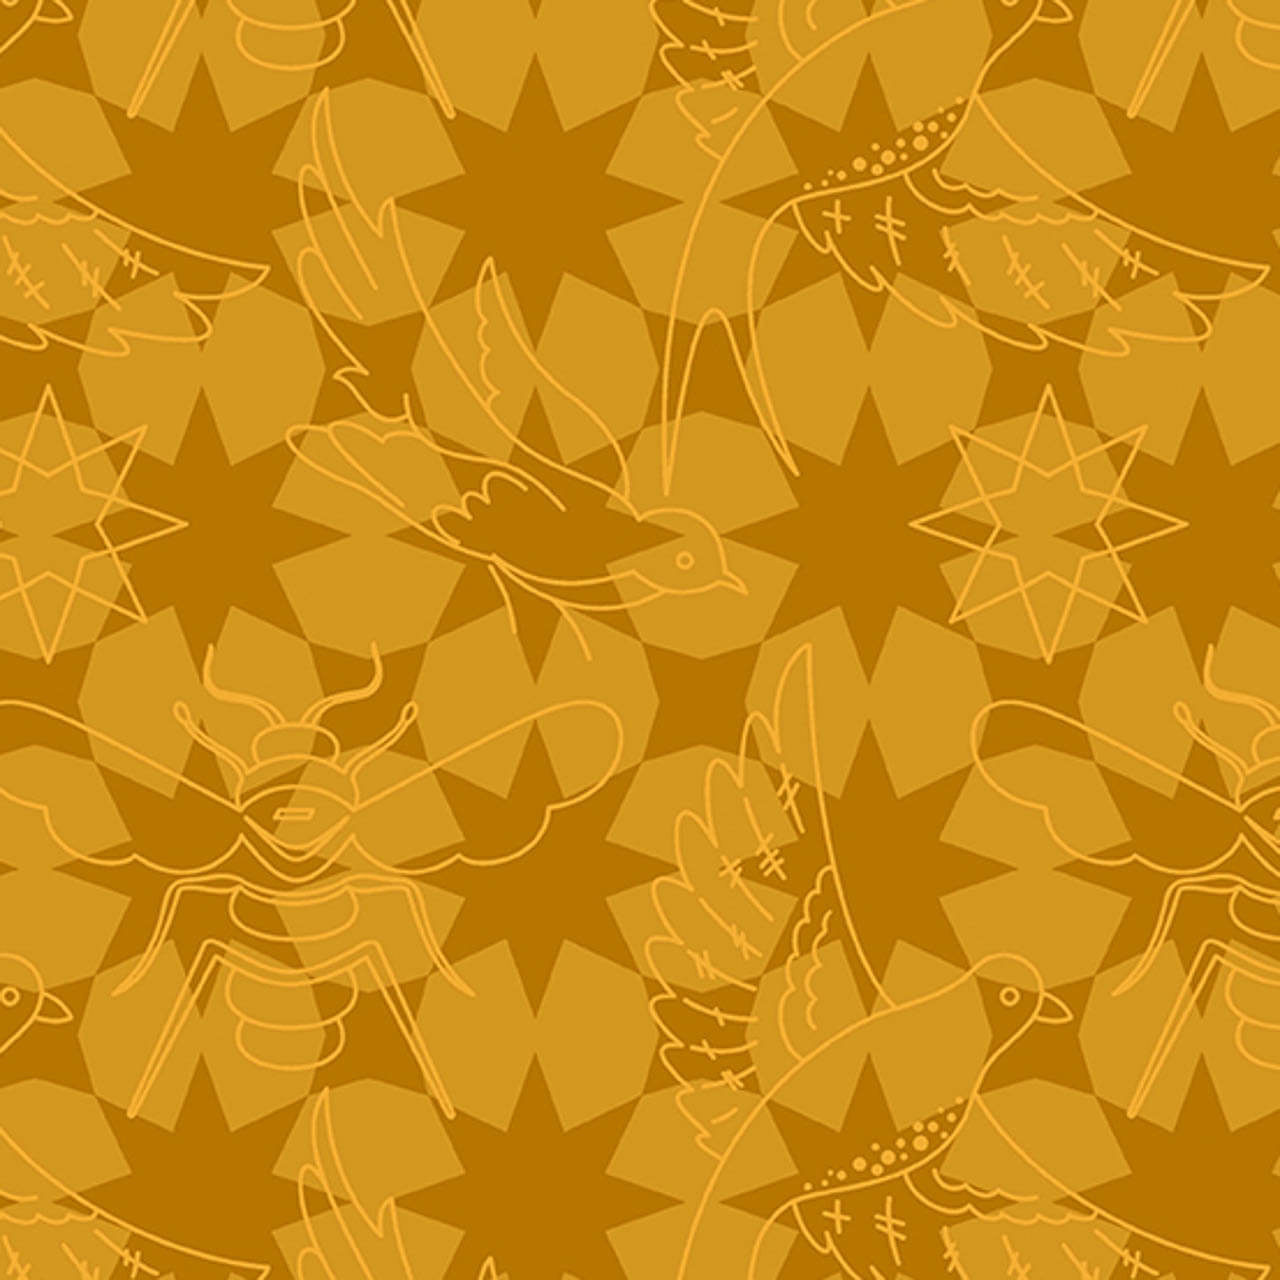 Flourish Amber from the Sun Print Luminance Collection by Alison Glass.